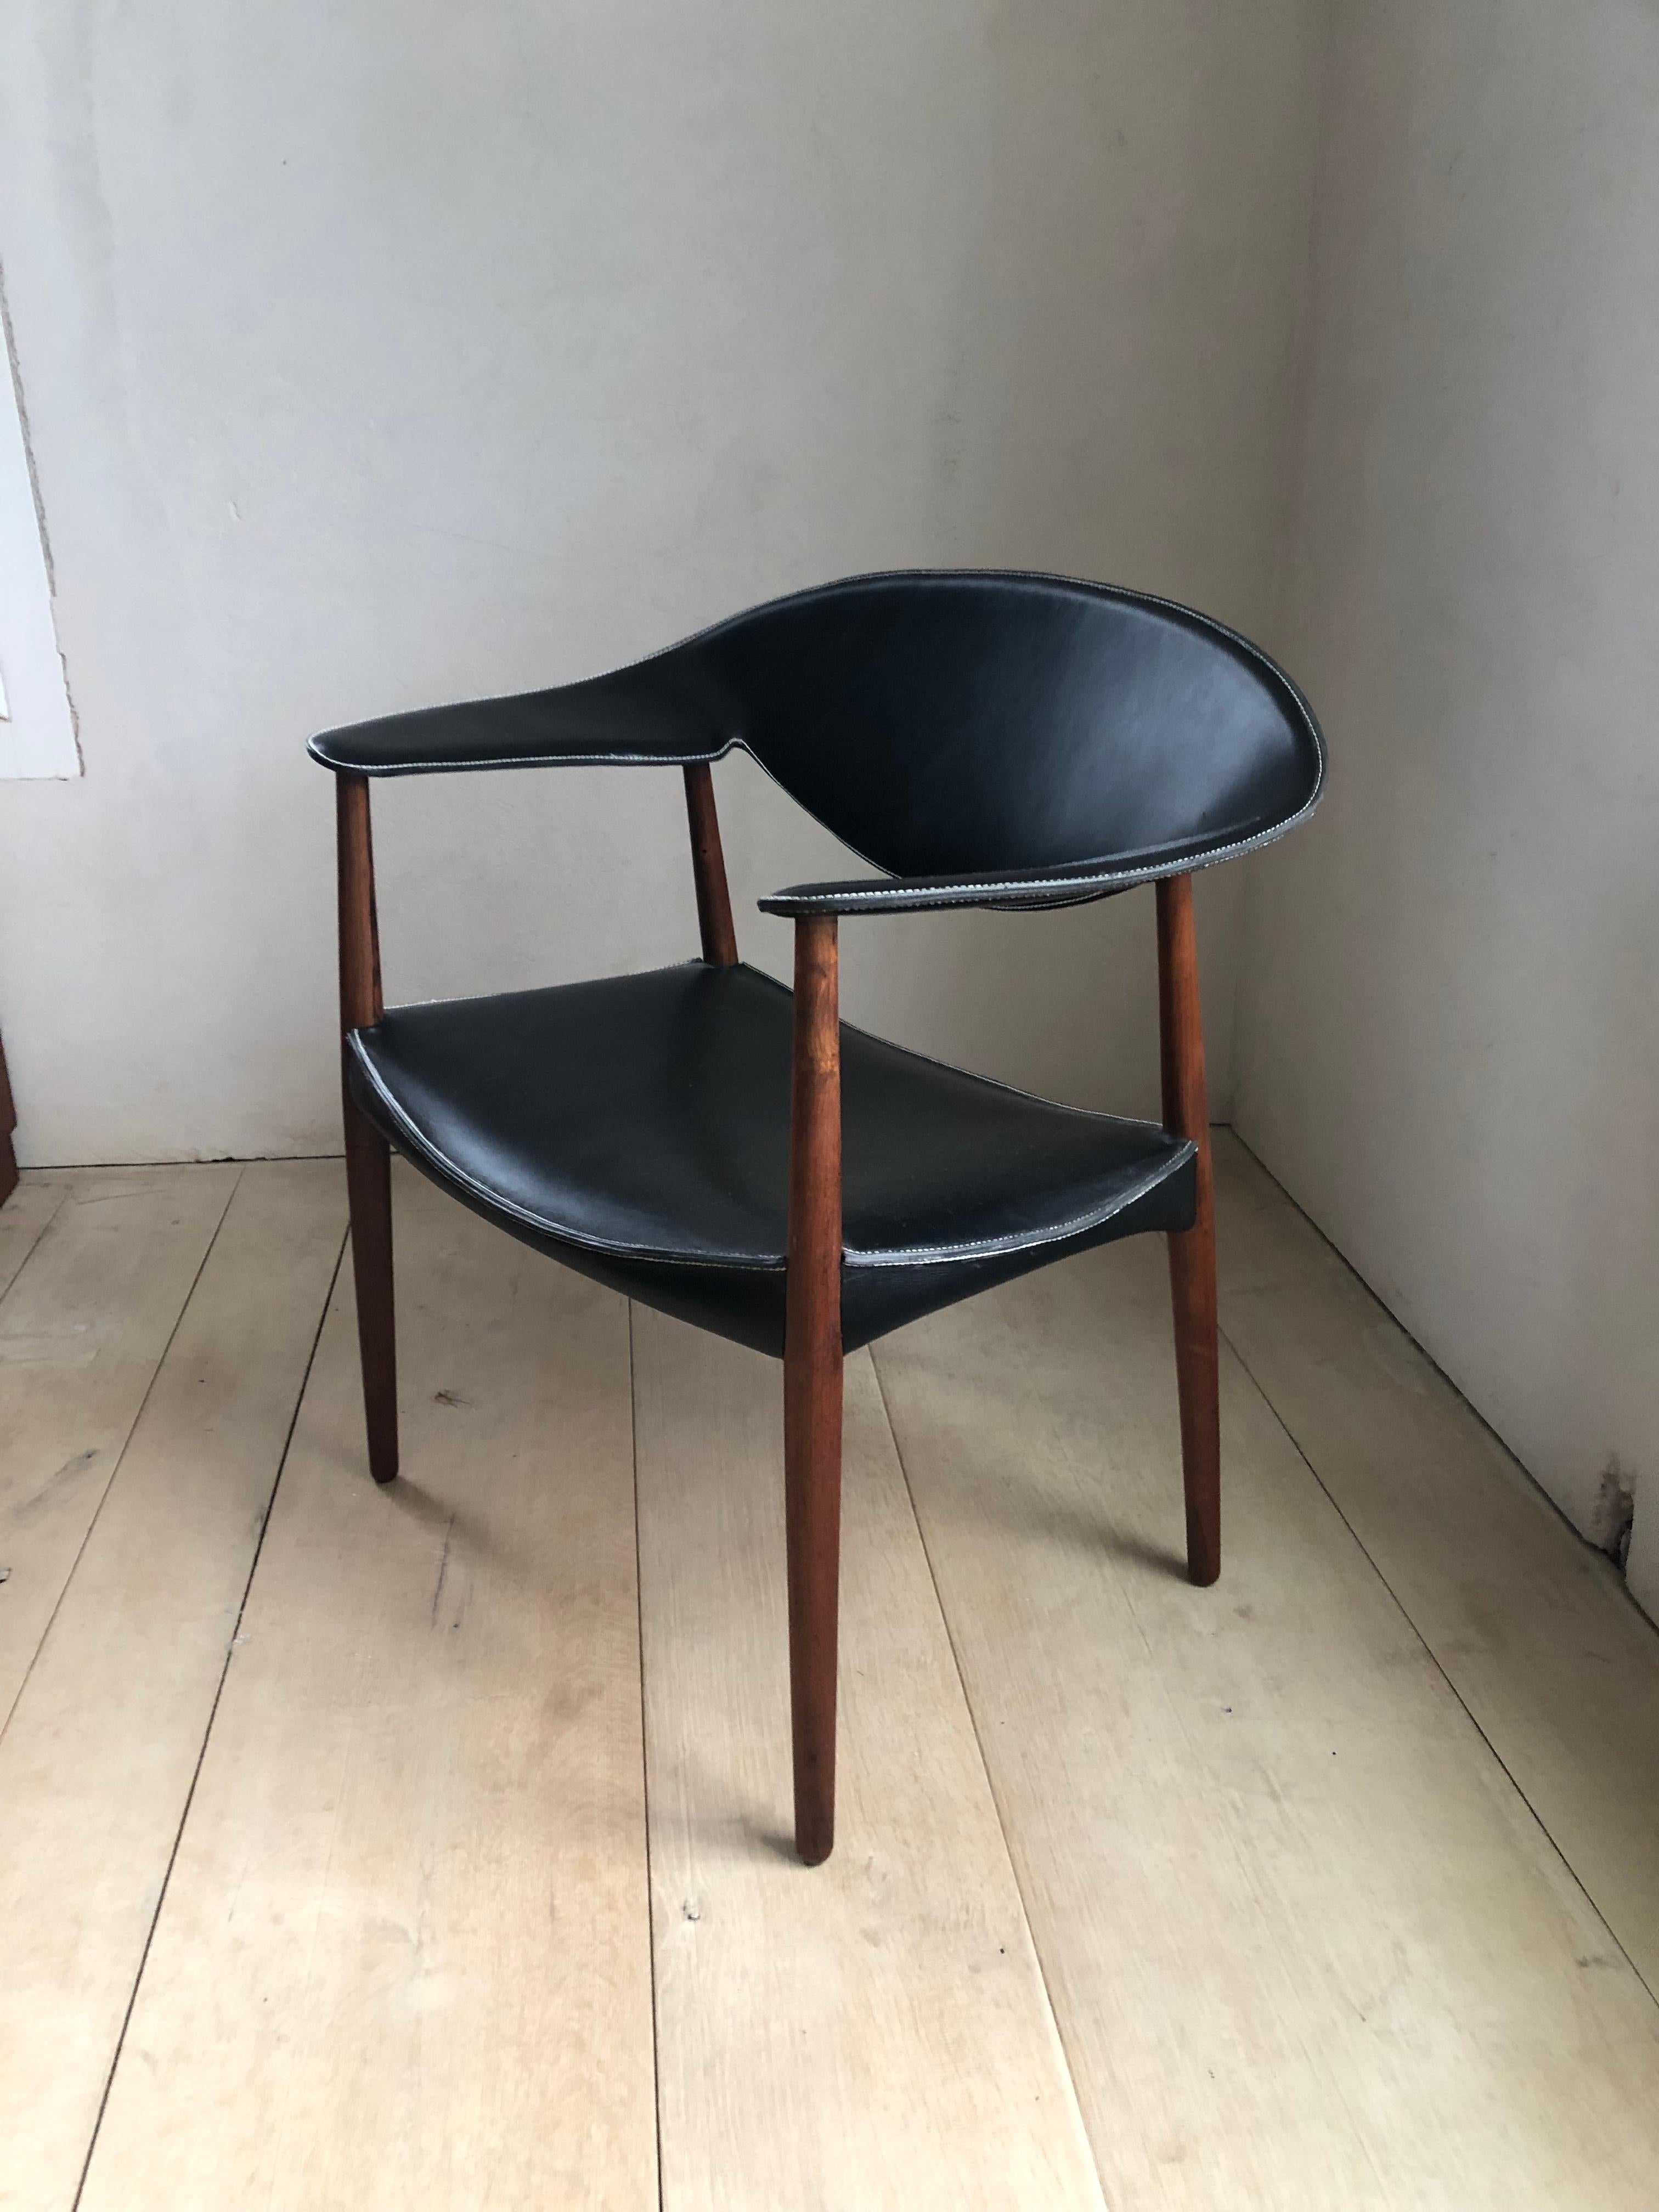 Ejner Larsen and Aksel Bender Madsen
Rare ‘Metropolitan’ armchair, model no. 2842/L
designed 1949, executed circa 1961
Rosewood, leather

Executed by master cabinetmaker Willy Beck, Copenhagen, Denmark. Underside with metal label impressed